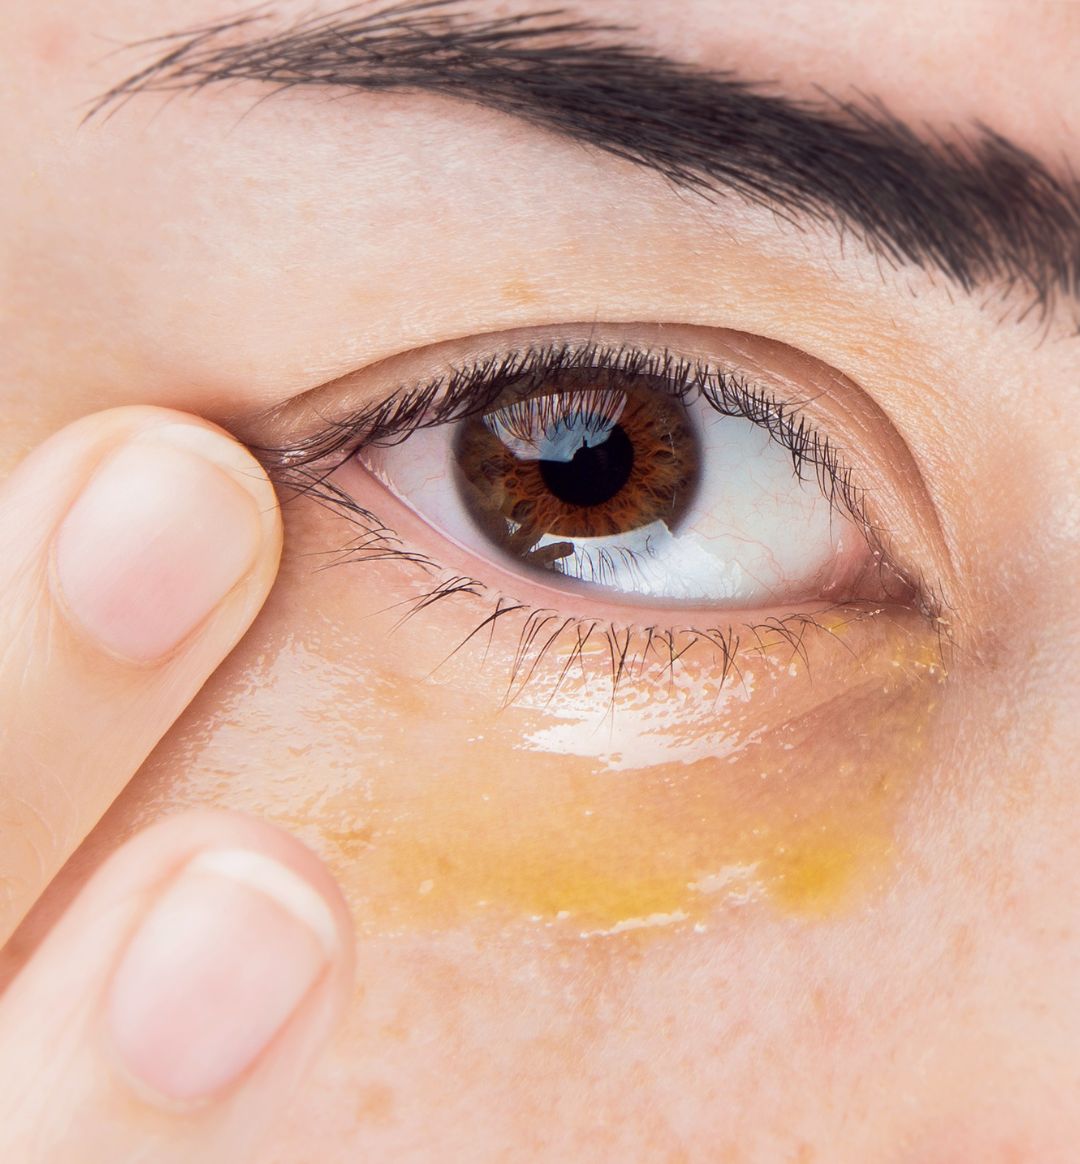 Is Eye Cream Really Necessary? Let's Find Out Once and For All – 100% PURE